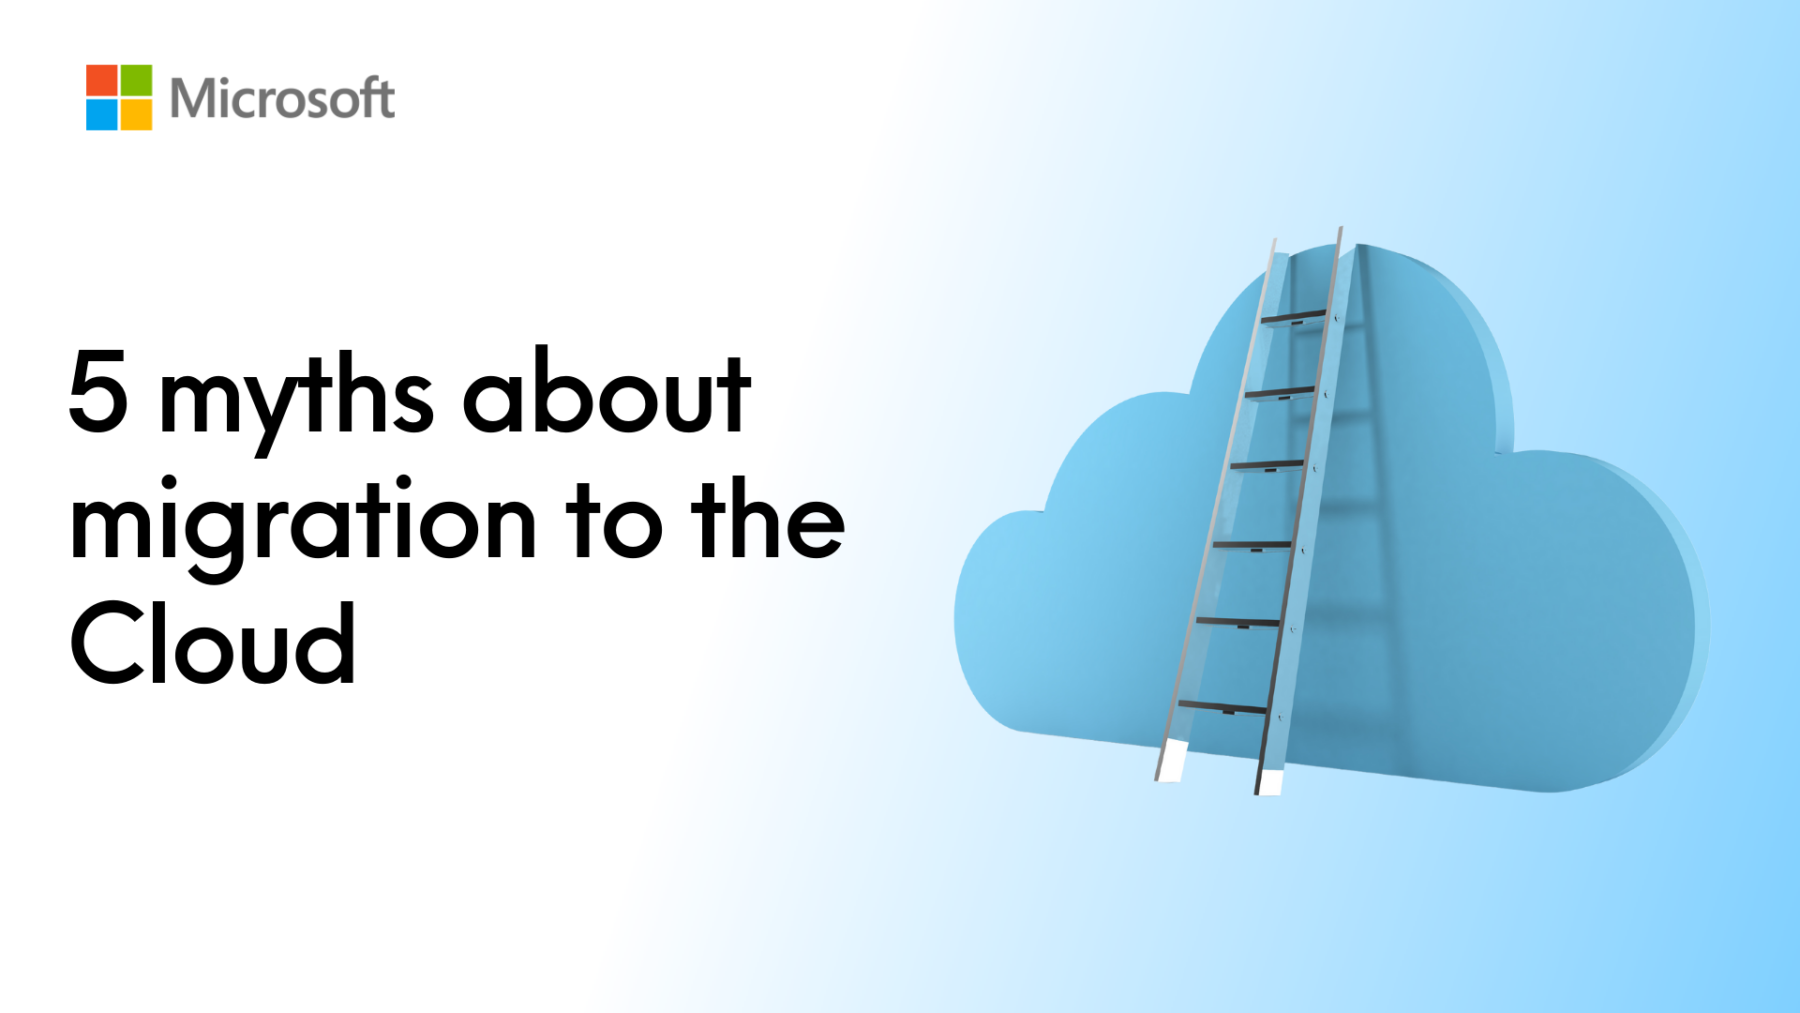 5 myths about migration to the Cloud